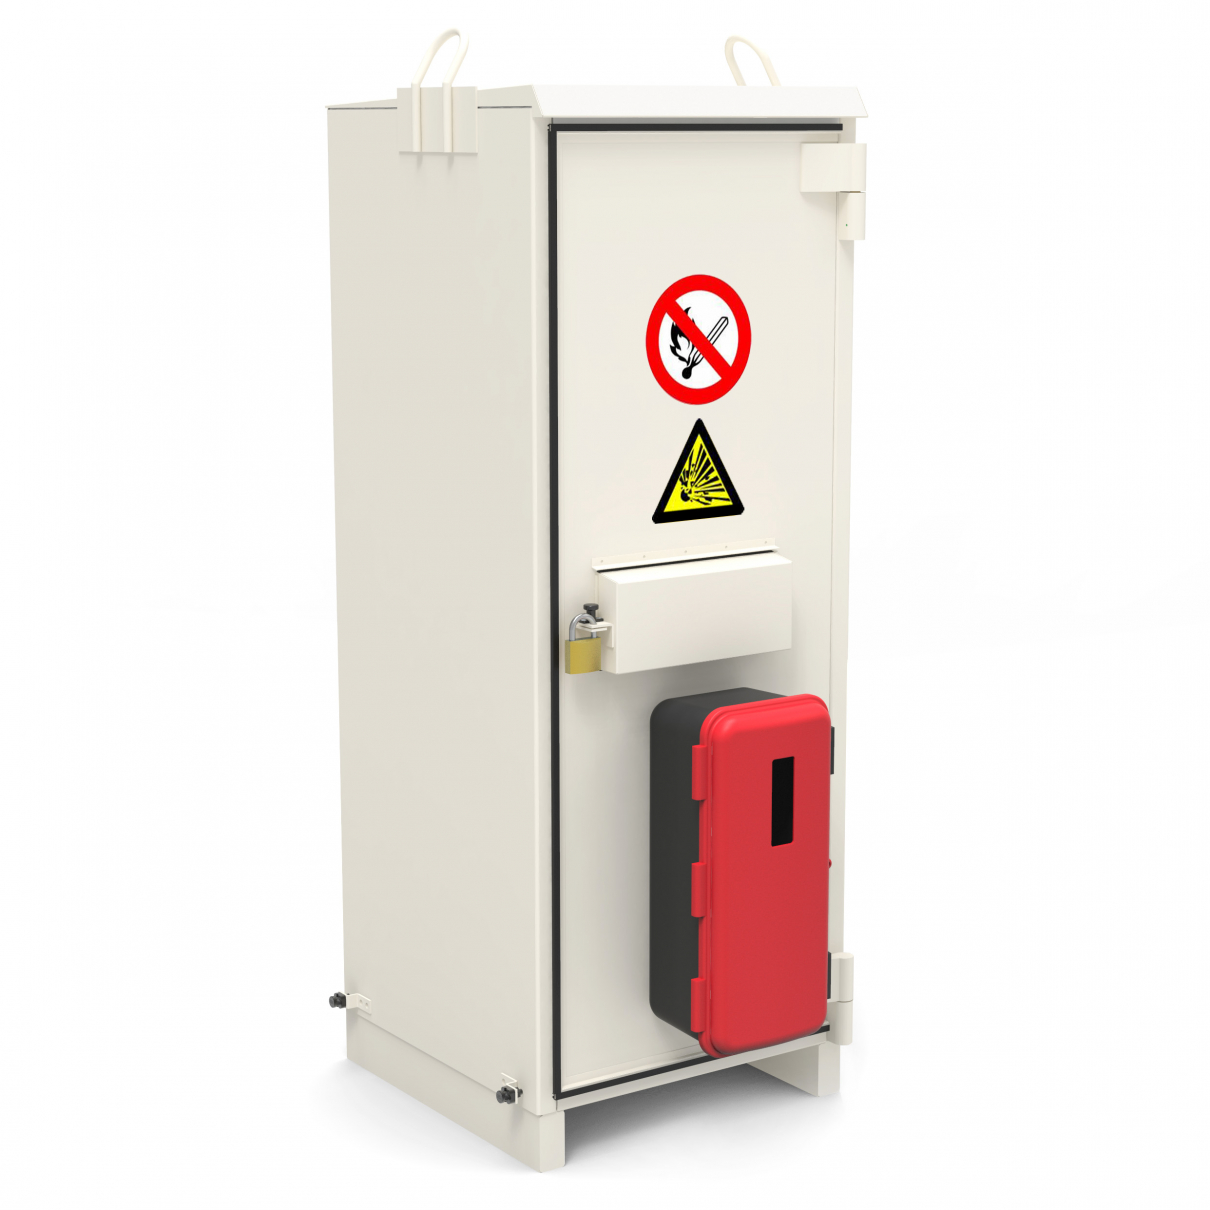 Dynamite cabinet Robur Safe Grade III 1500 in the group All products / High security safes / Grade III High security safes at MBG Sweden (716710VKR)